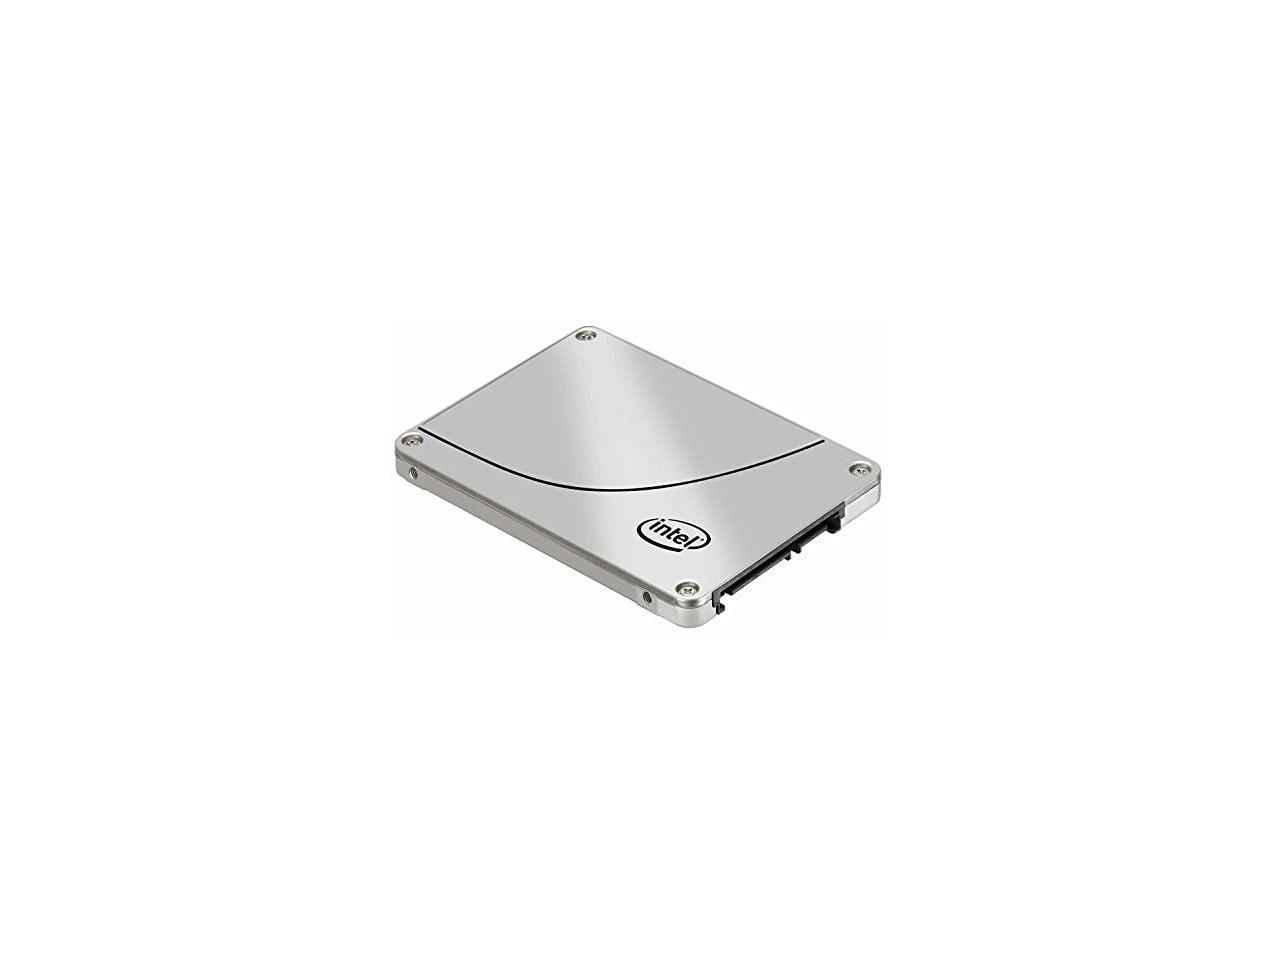 Intel SSDSC2KB480GZ01 D3-S4520 480Gb SATA-6Gbps 2.5-Inch Solid State Drive - image 5 of 5